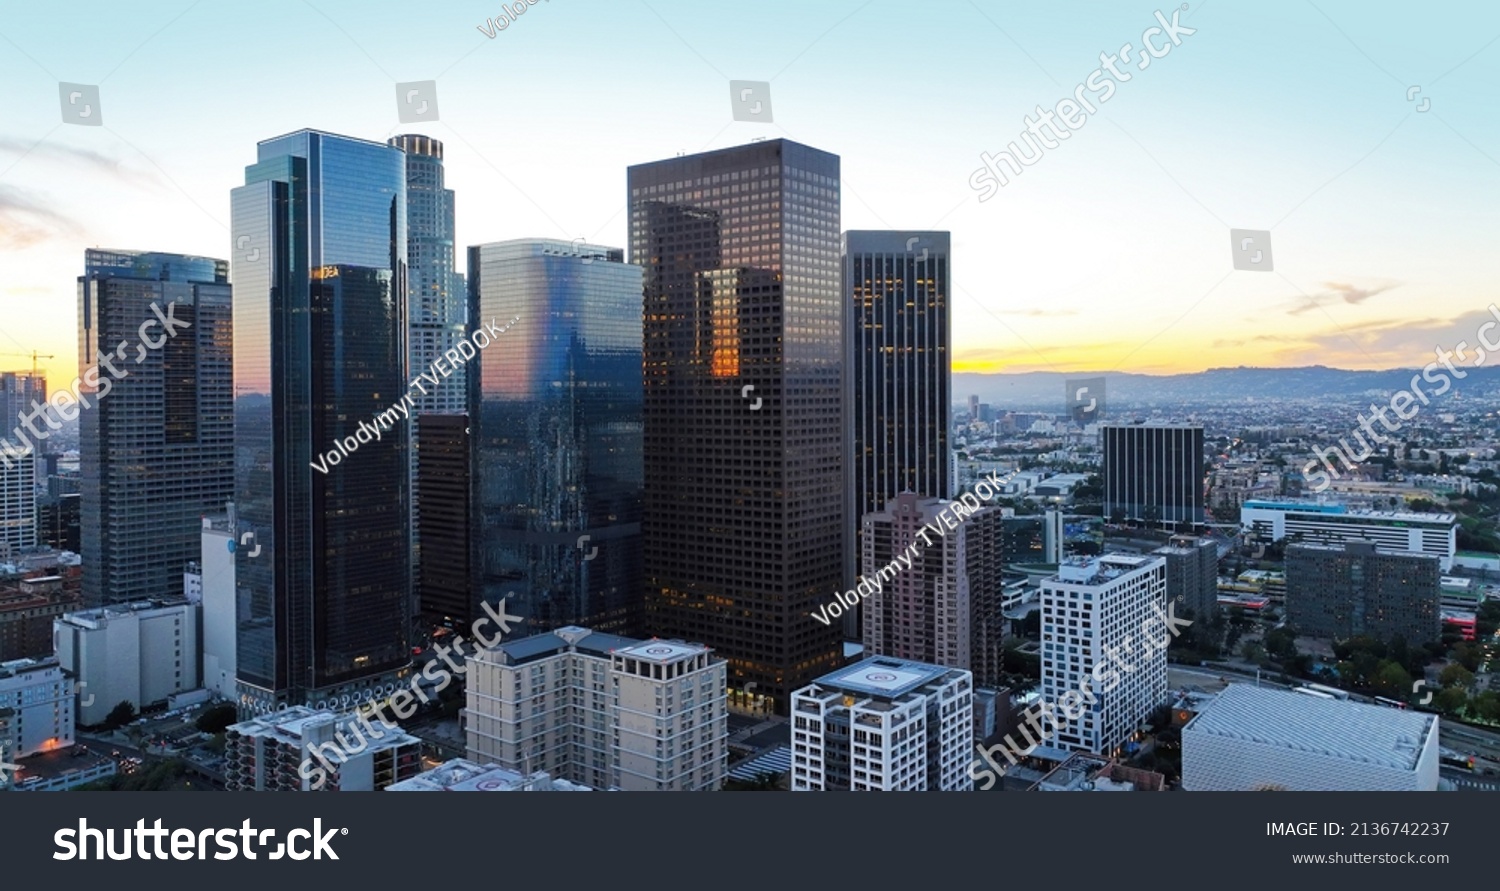 Los Angels downtown skyline, panoramic city skyscrapers, downtown skyline at sunset. #2136742237